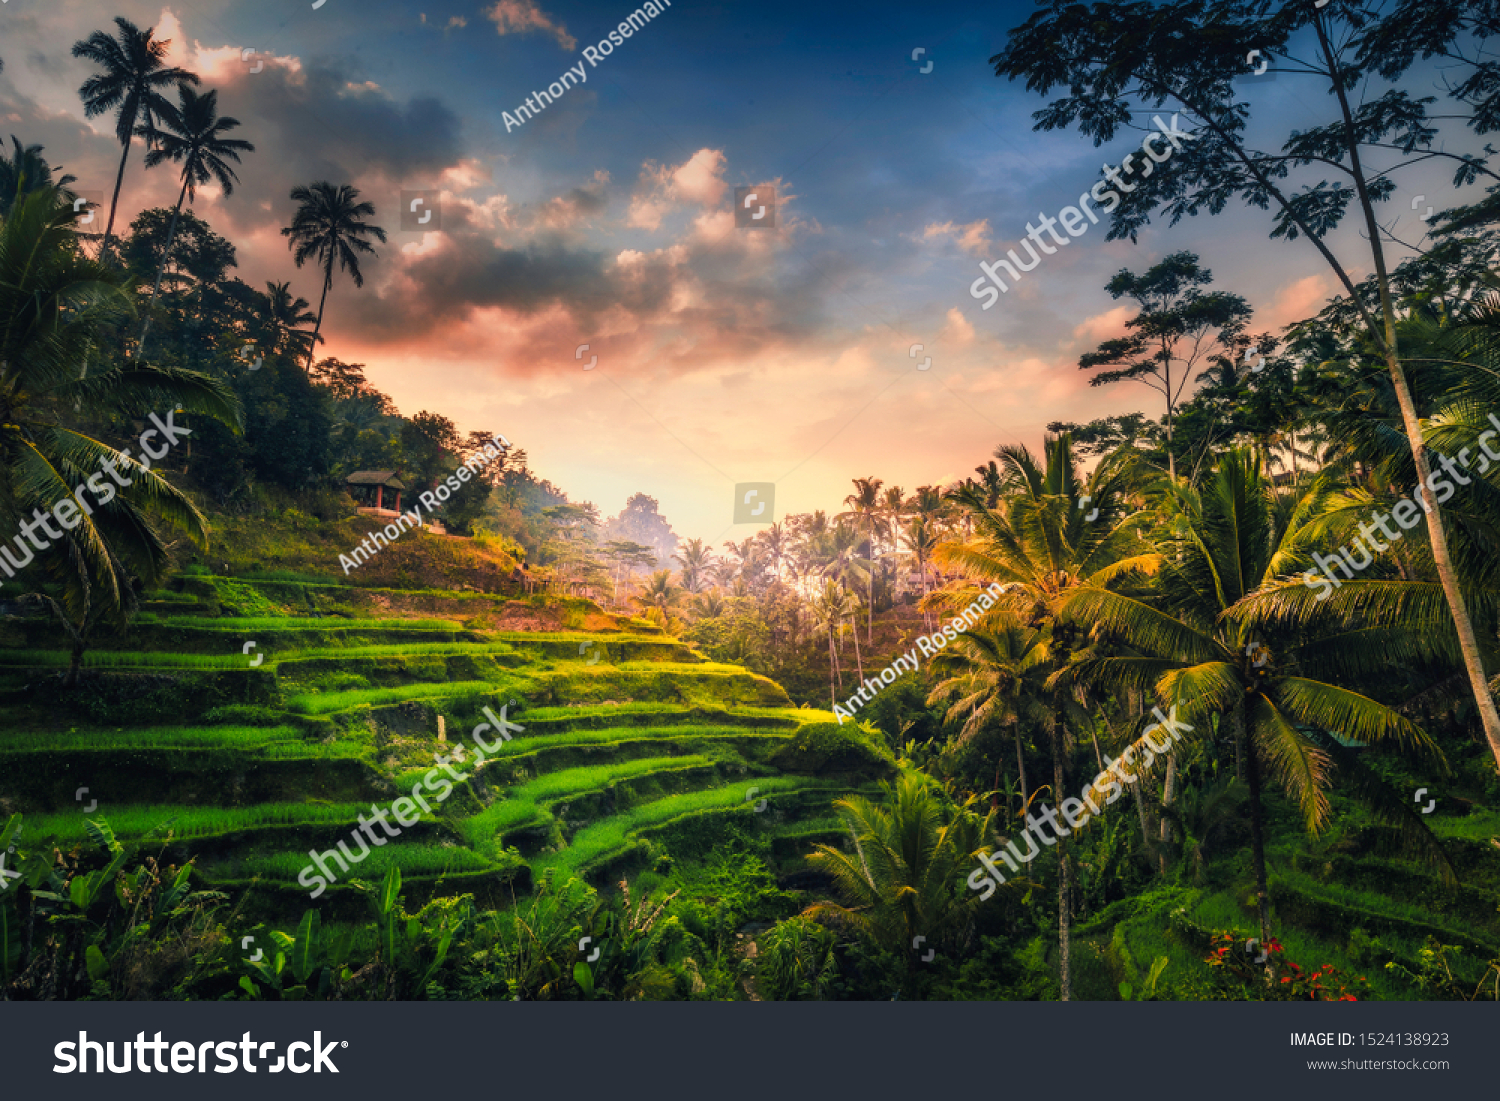 Tegalalang Rice Terrace at sunrice. The  rice fields are a big tourist attraction in Bali situated 20 minutes from Ubud #1524138923